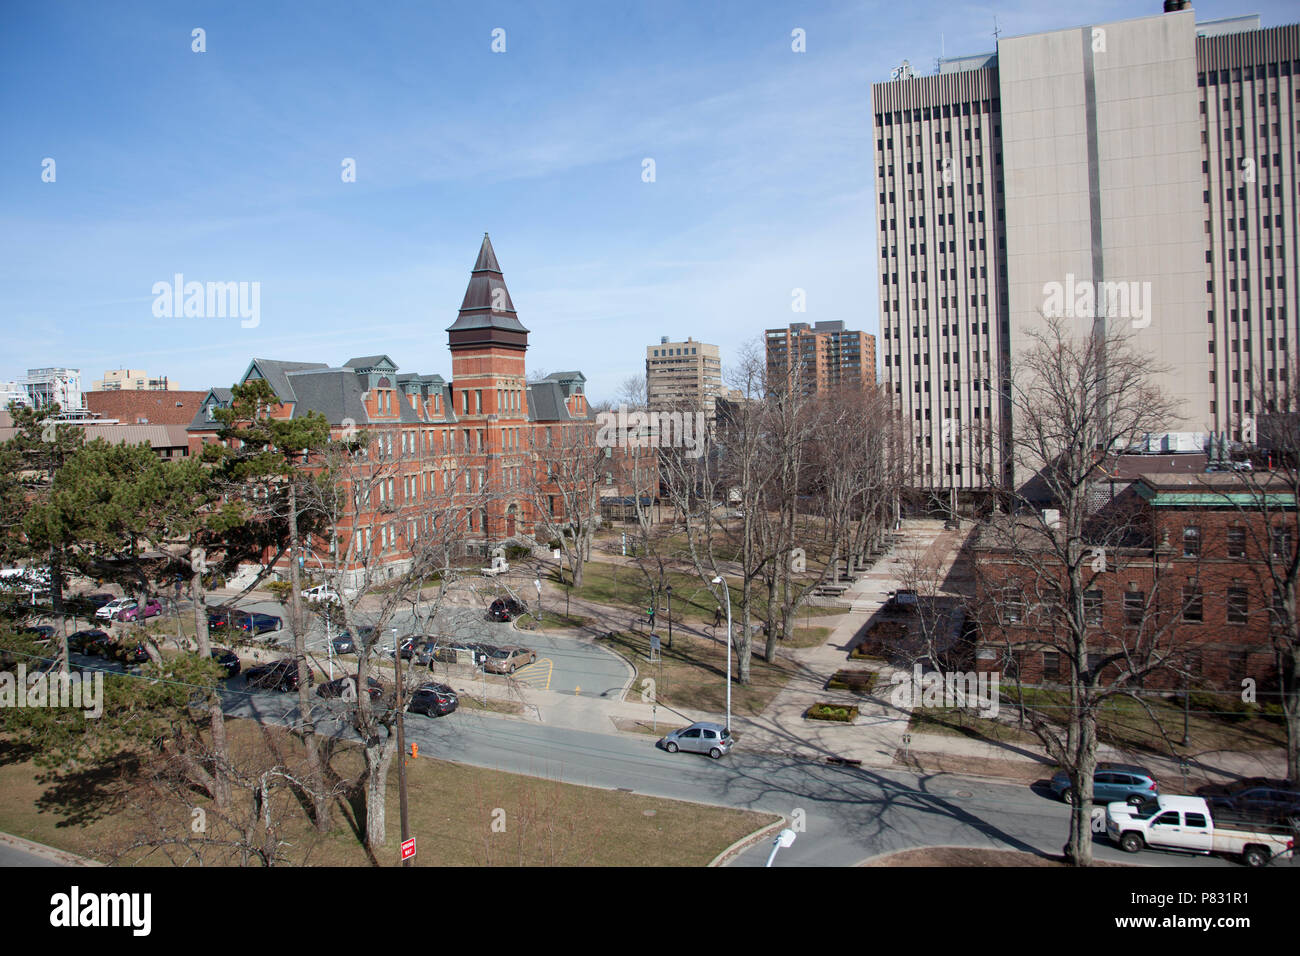 April 25, 2018 - Halifax, Nova Scotia: Looking across Dalhousie campus to the Forest building, which is home of nursing and occupational therapy, and  Stock Photo